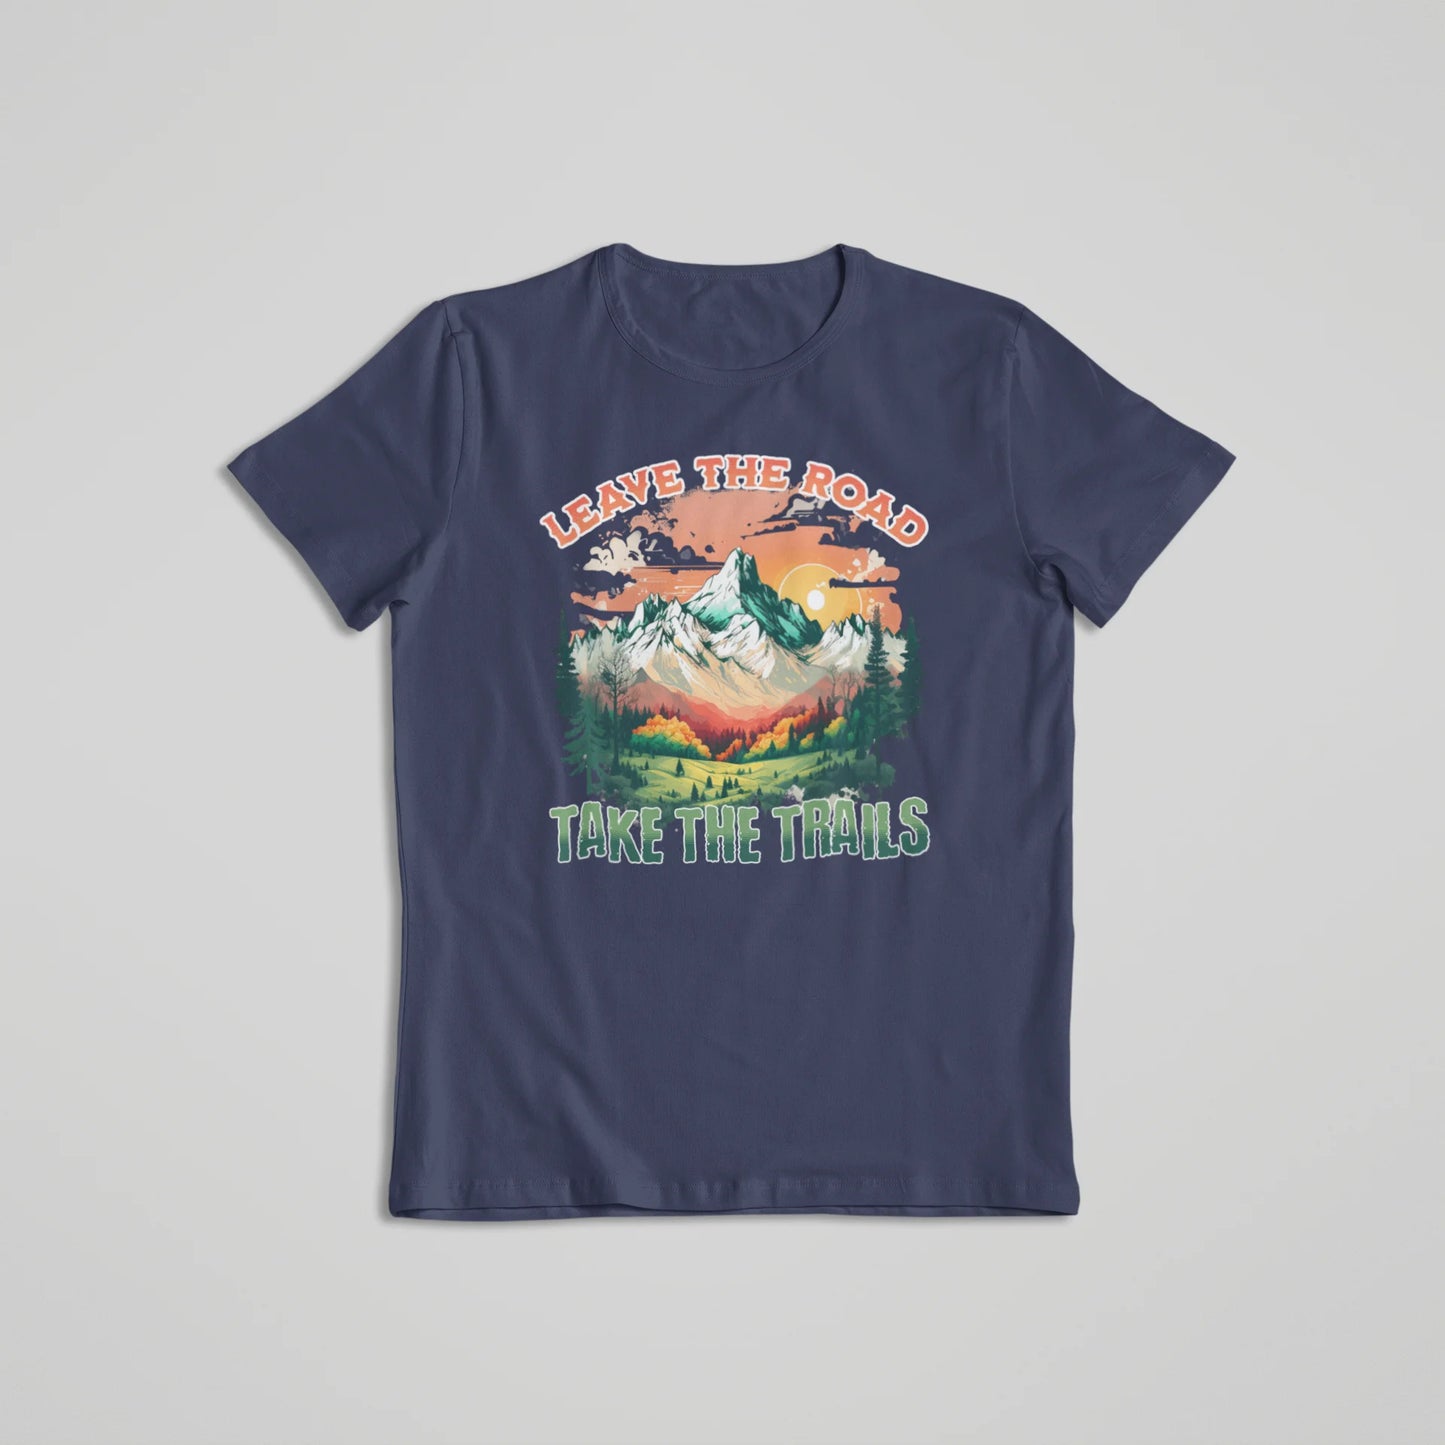 Leave The Road Take The Trails T-shirt Navy Blue